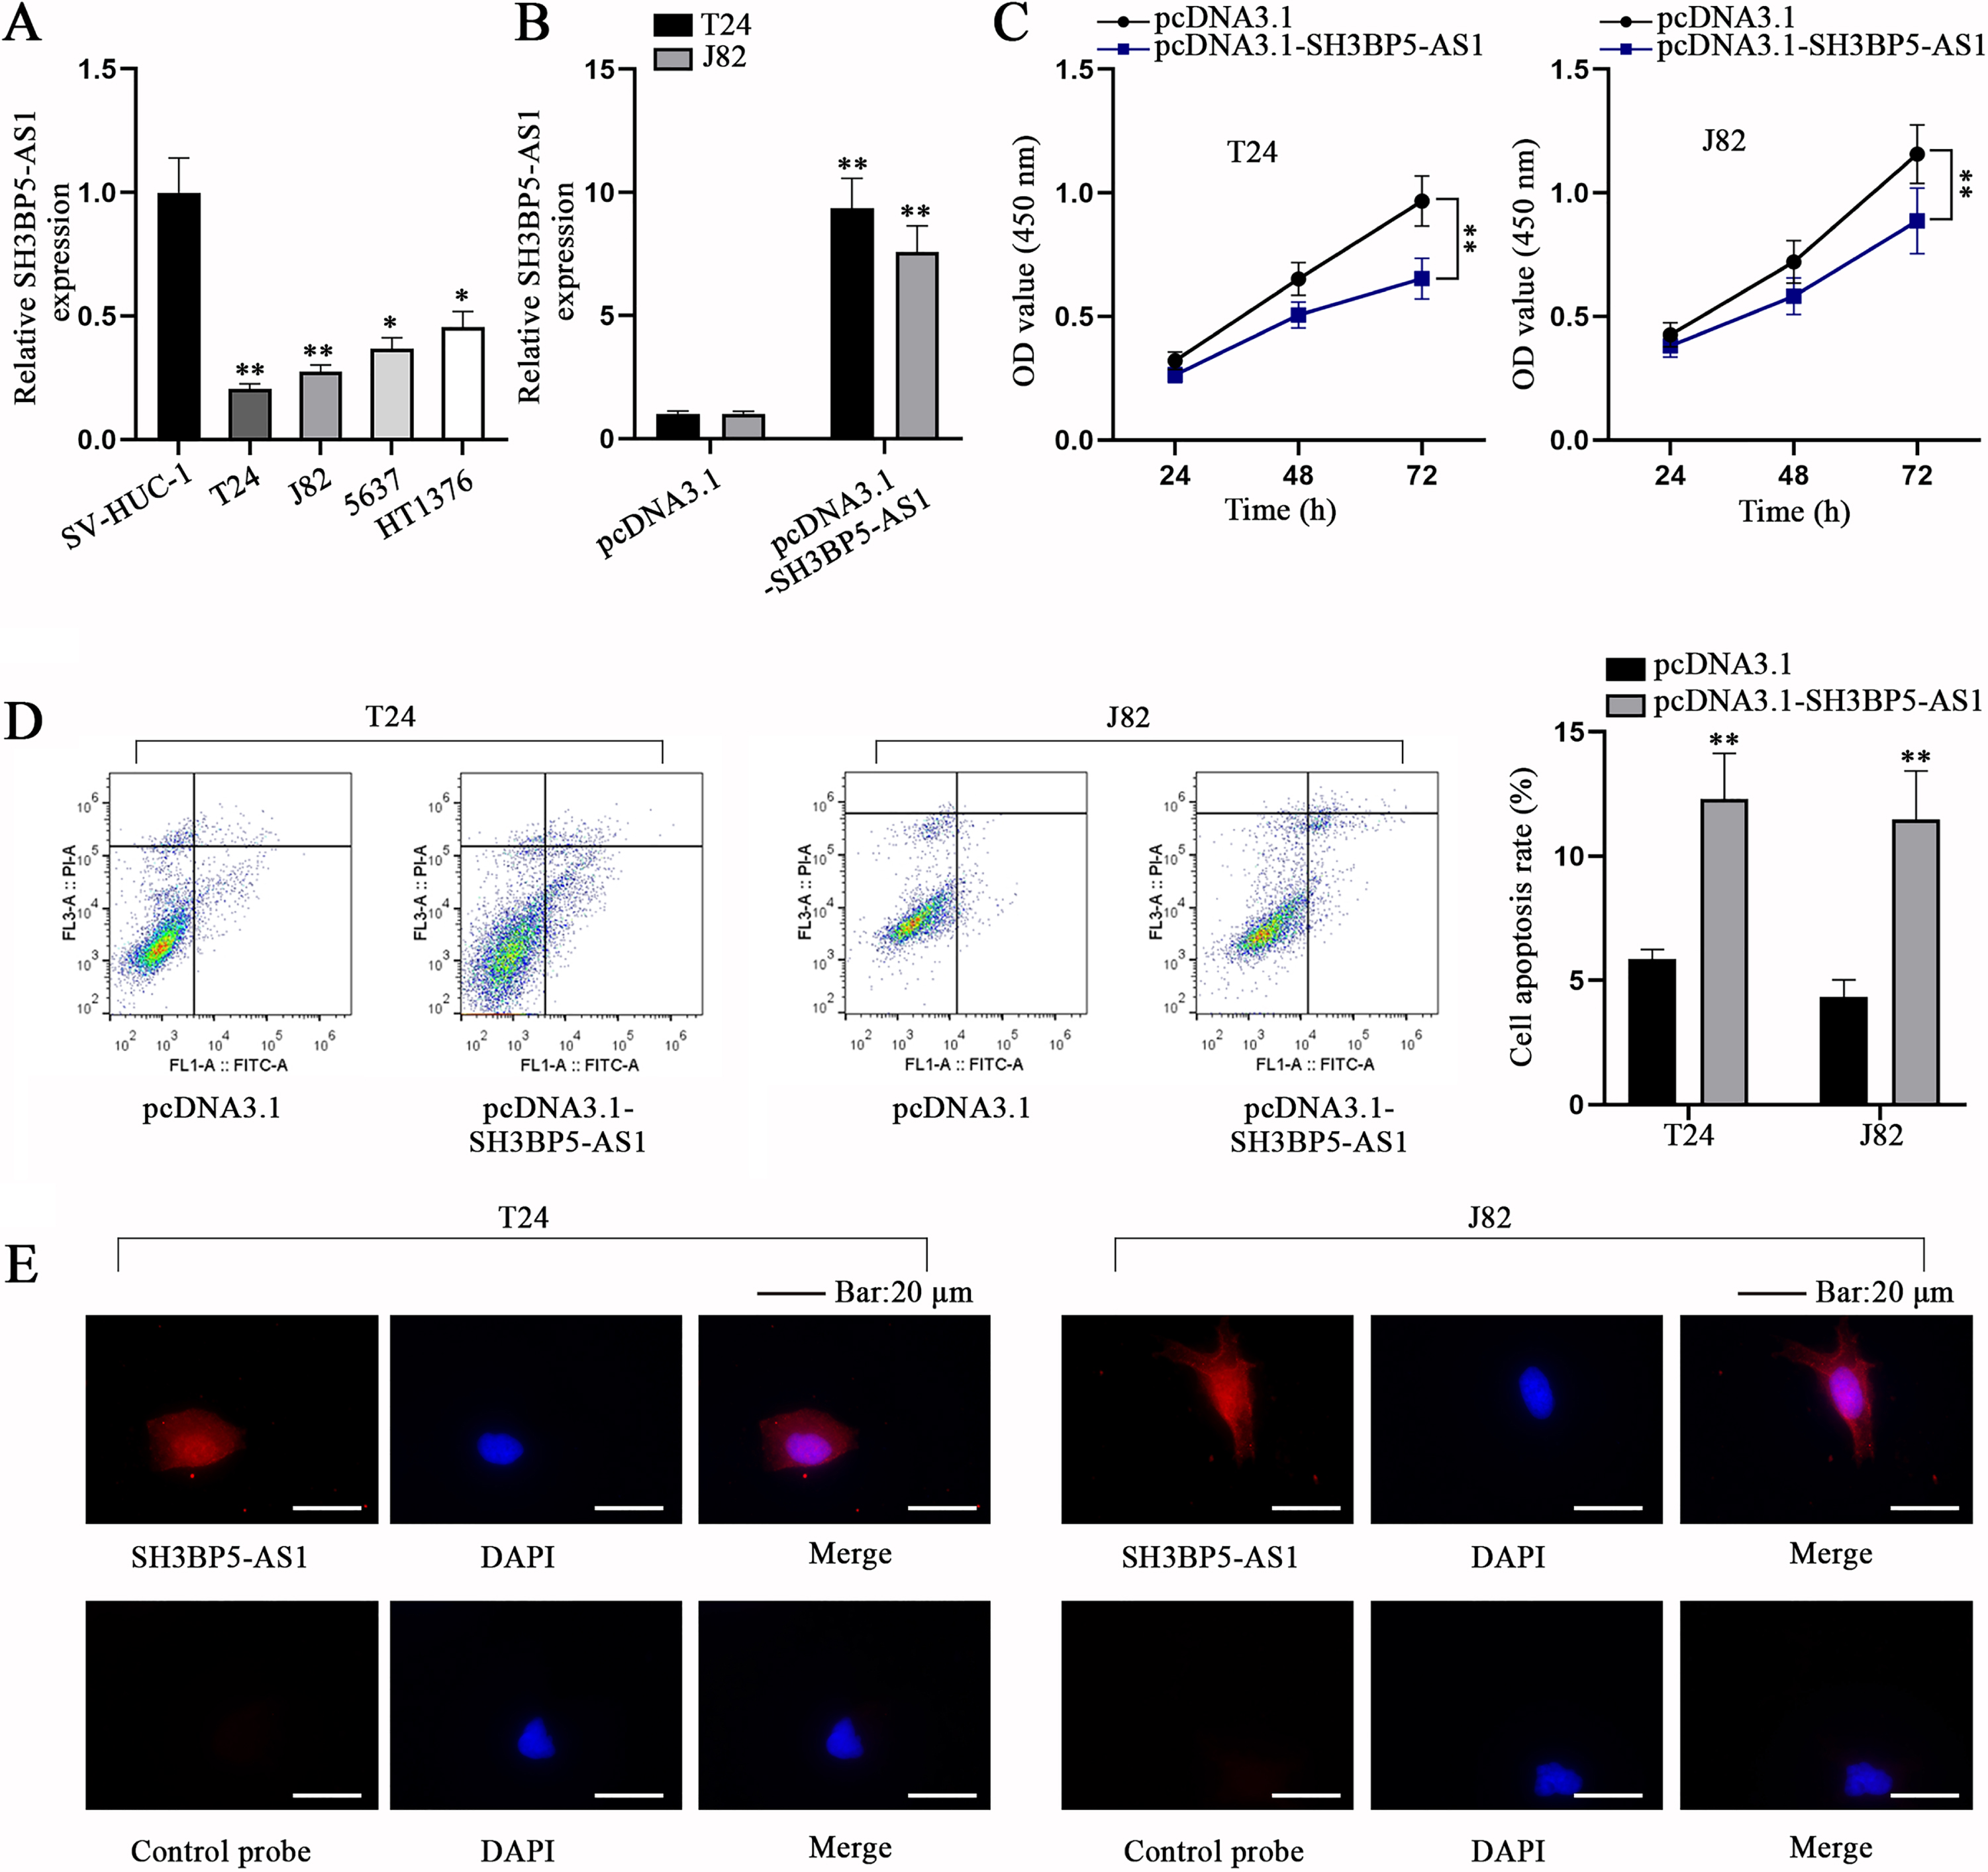 SH3BP5-AS1 impedes BC cell proliferation but facilitates BC cell apoptosis. (A) qPCR analysis was done for calculating the expression level of SH3BP5-AS1 in immortalized human urothelial cell line (SV-HUC-1) and human BC cell lines (T24, J82, 5637, HT1376). (B) SH3BP5-AS1 expression was detected in pcDNA3.1-SH3BP5-AS1-transfected cells via qPCR. (C) The viability of pcDNA3.1-SH3BP5-AS1-transfected cells was evaluated via CCK-8 assay. (D) The apoptosis of pcDNA3.1-SH3BP5-AS1-transfected cells was analyzed via flow cytometry assay. (E) FISH assay was done to determine the cellular distribution of SH3BP5-AS1 in T24 and J82 cells. *p < 0.05, **p < 0.01.